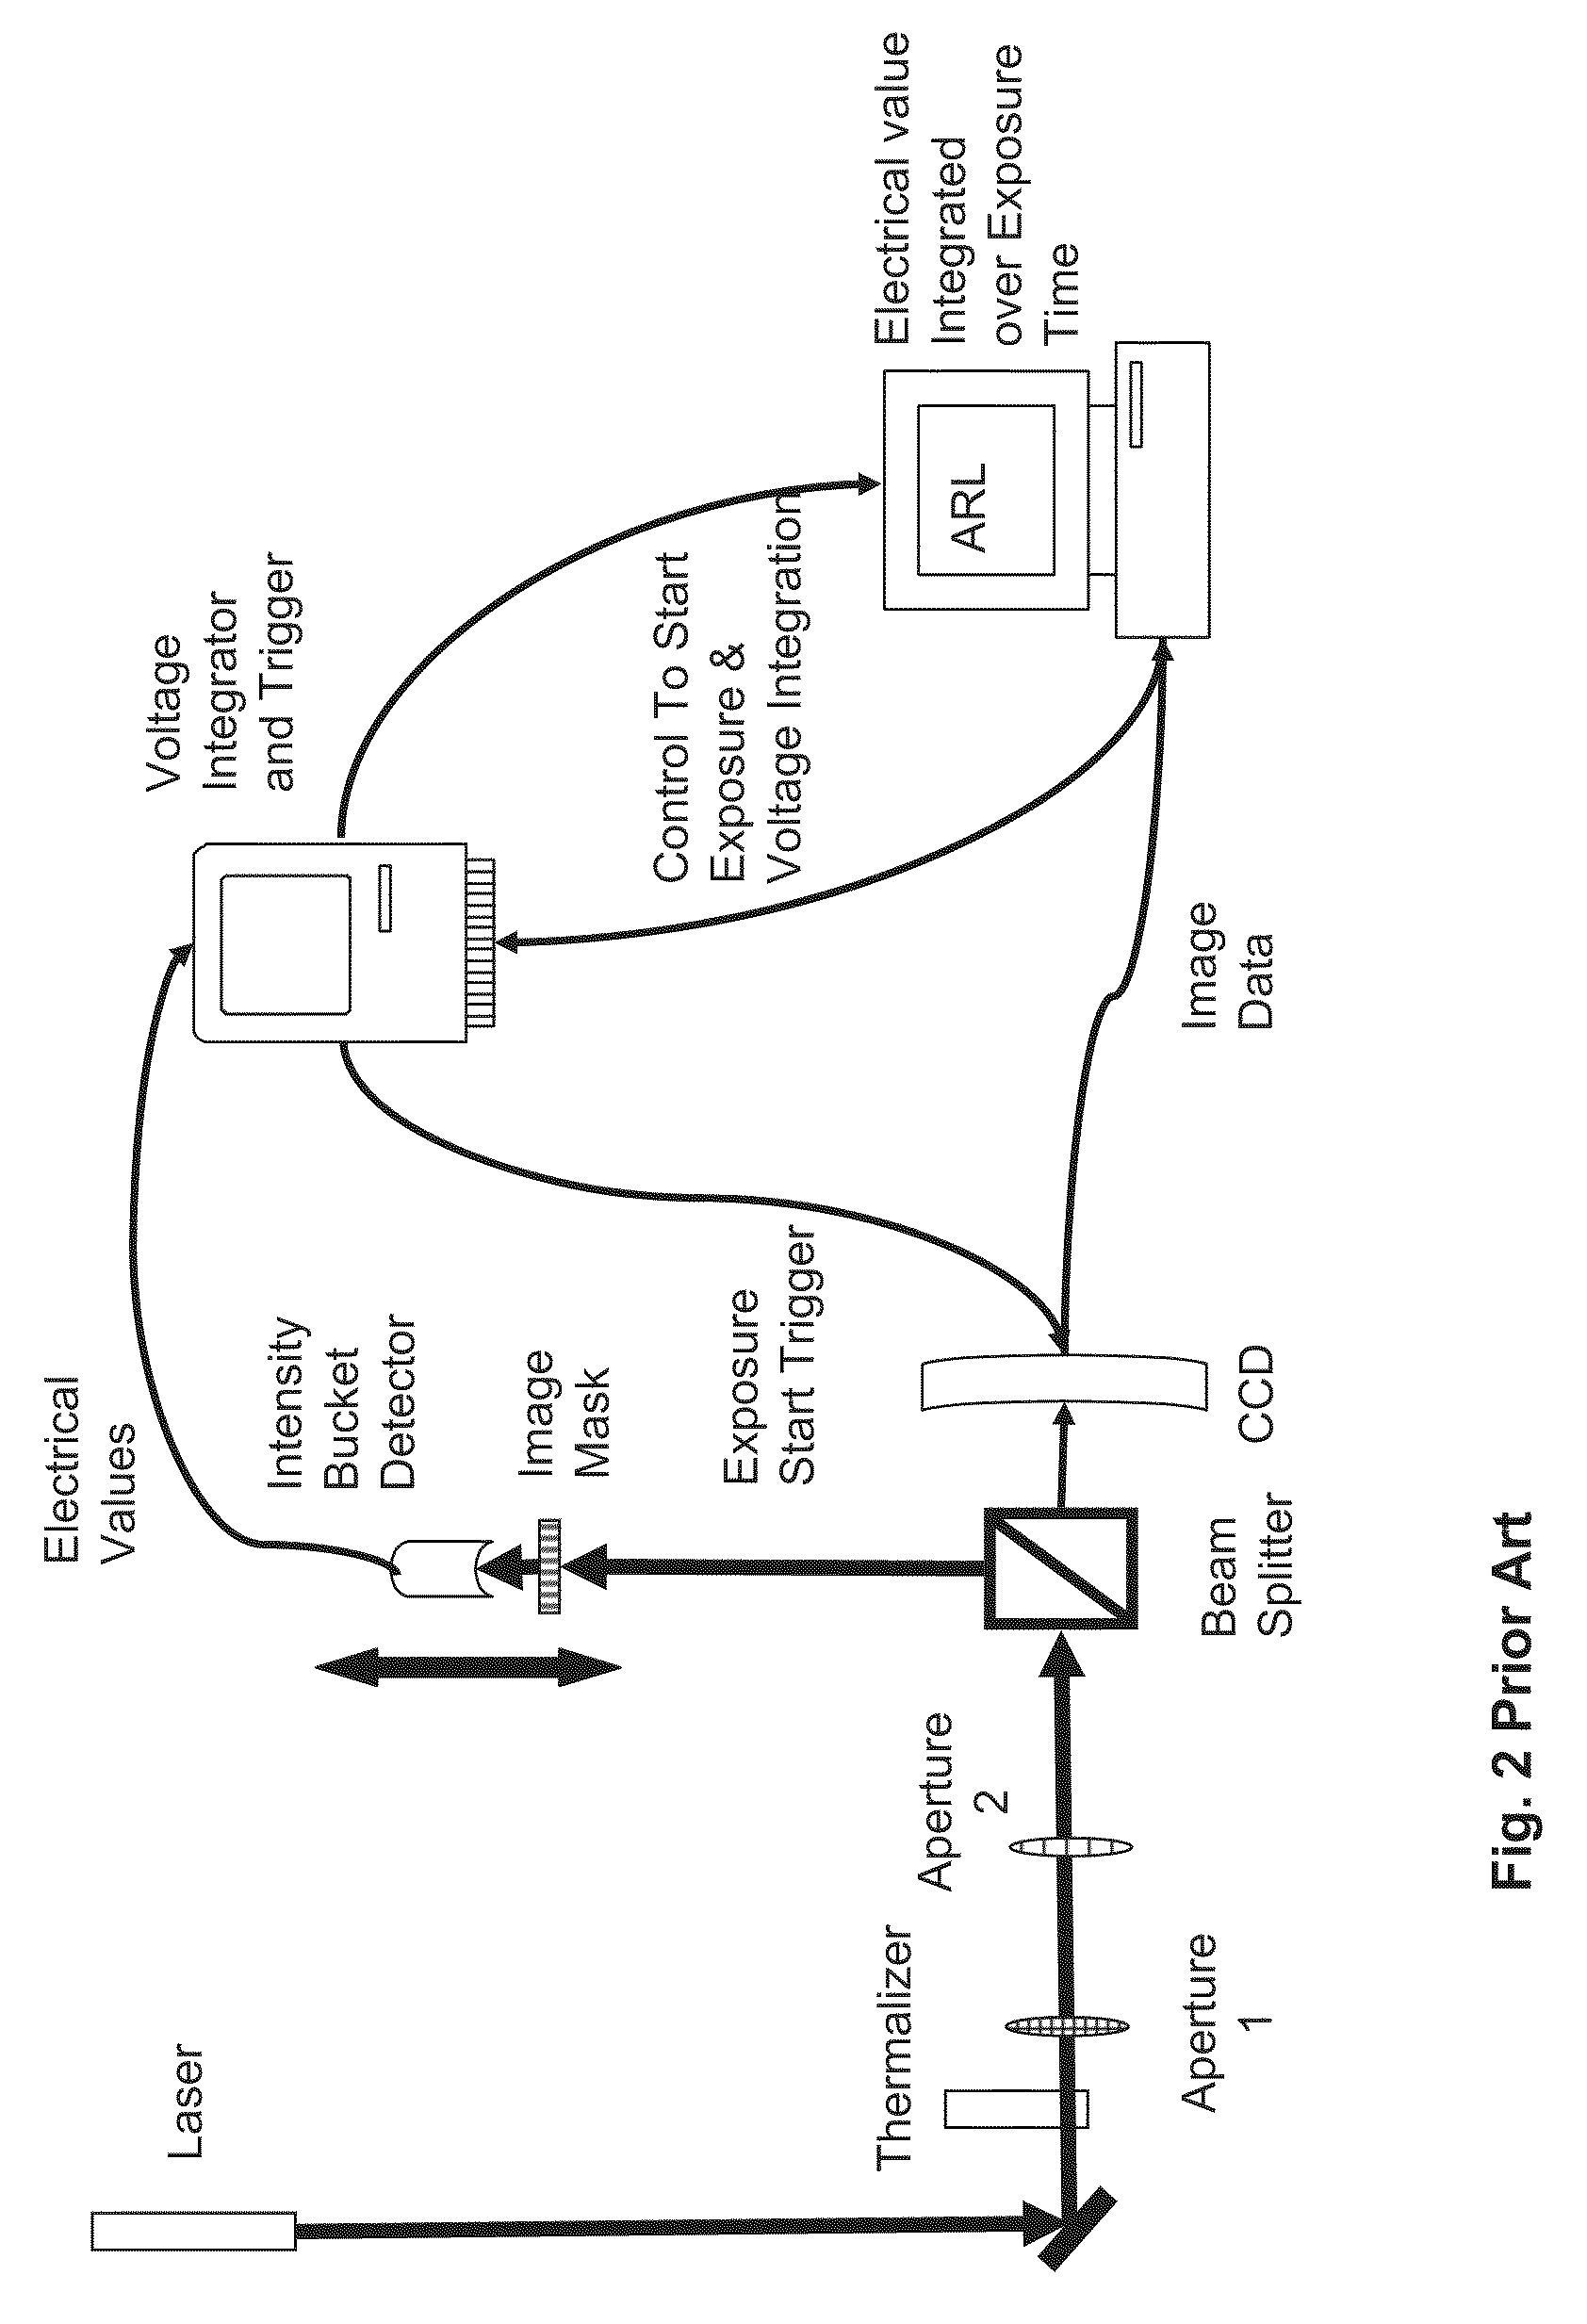 Method and system for quantum and quantum inspired ghost imaging